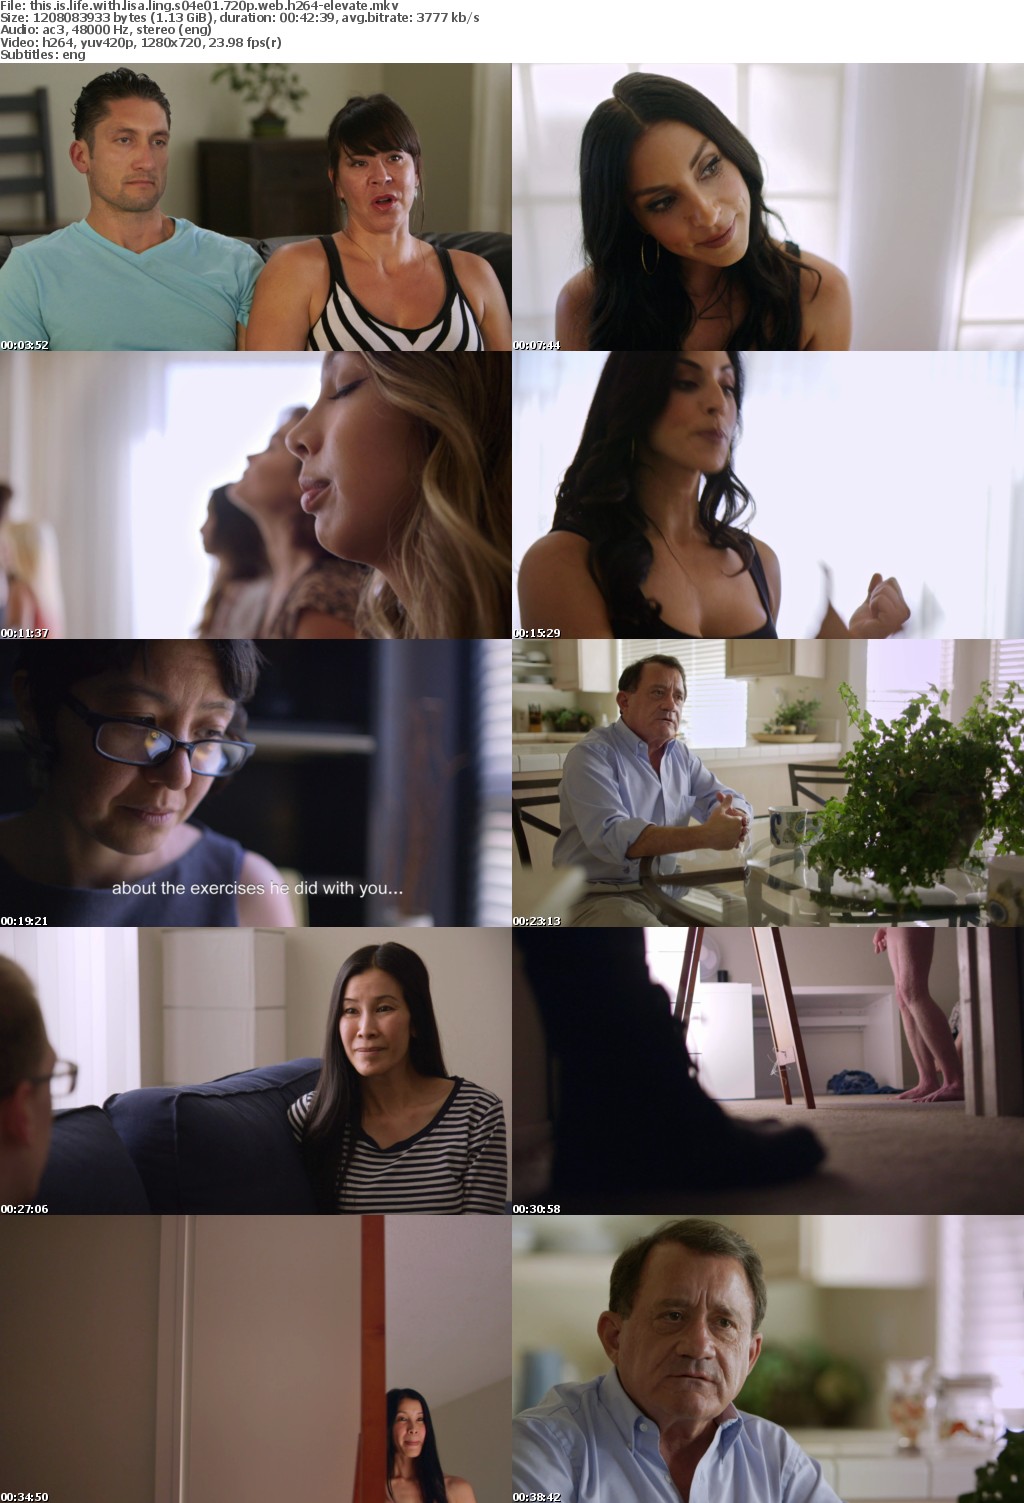 This Is Life with Lisa Ling S04E01 720p WEB h264-ELEVATE